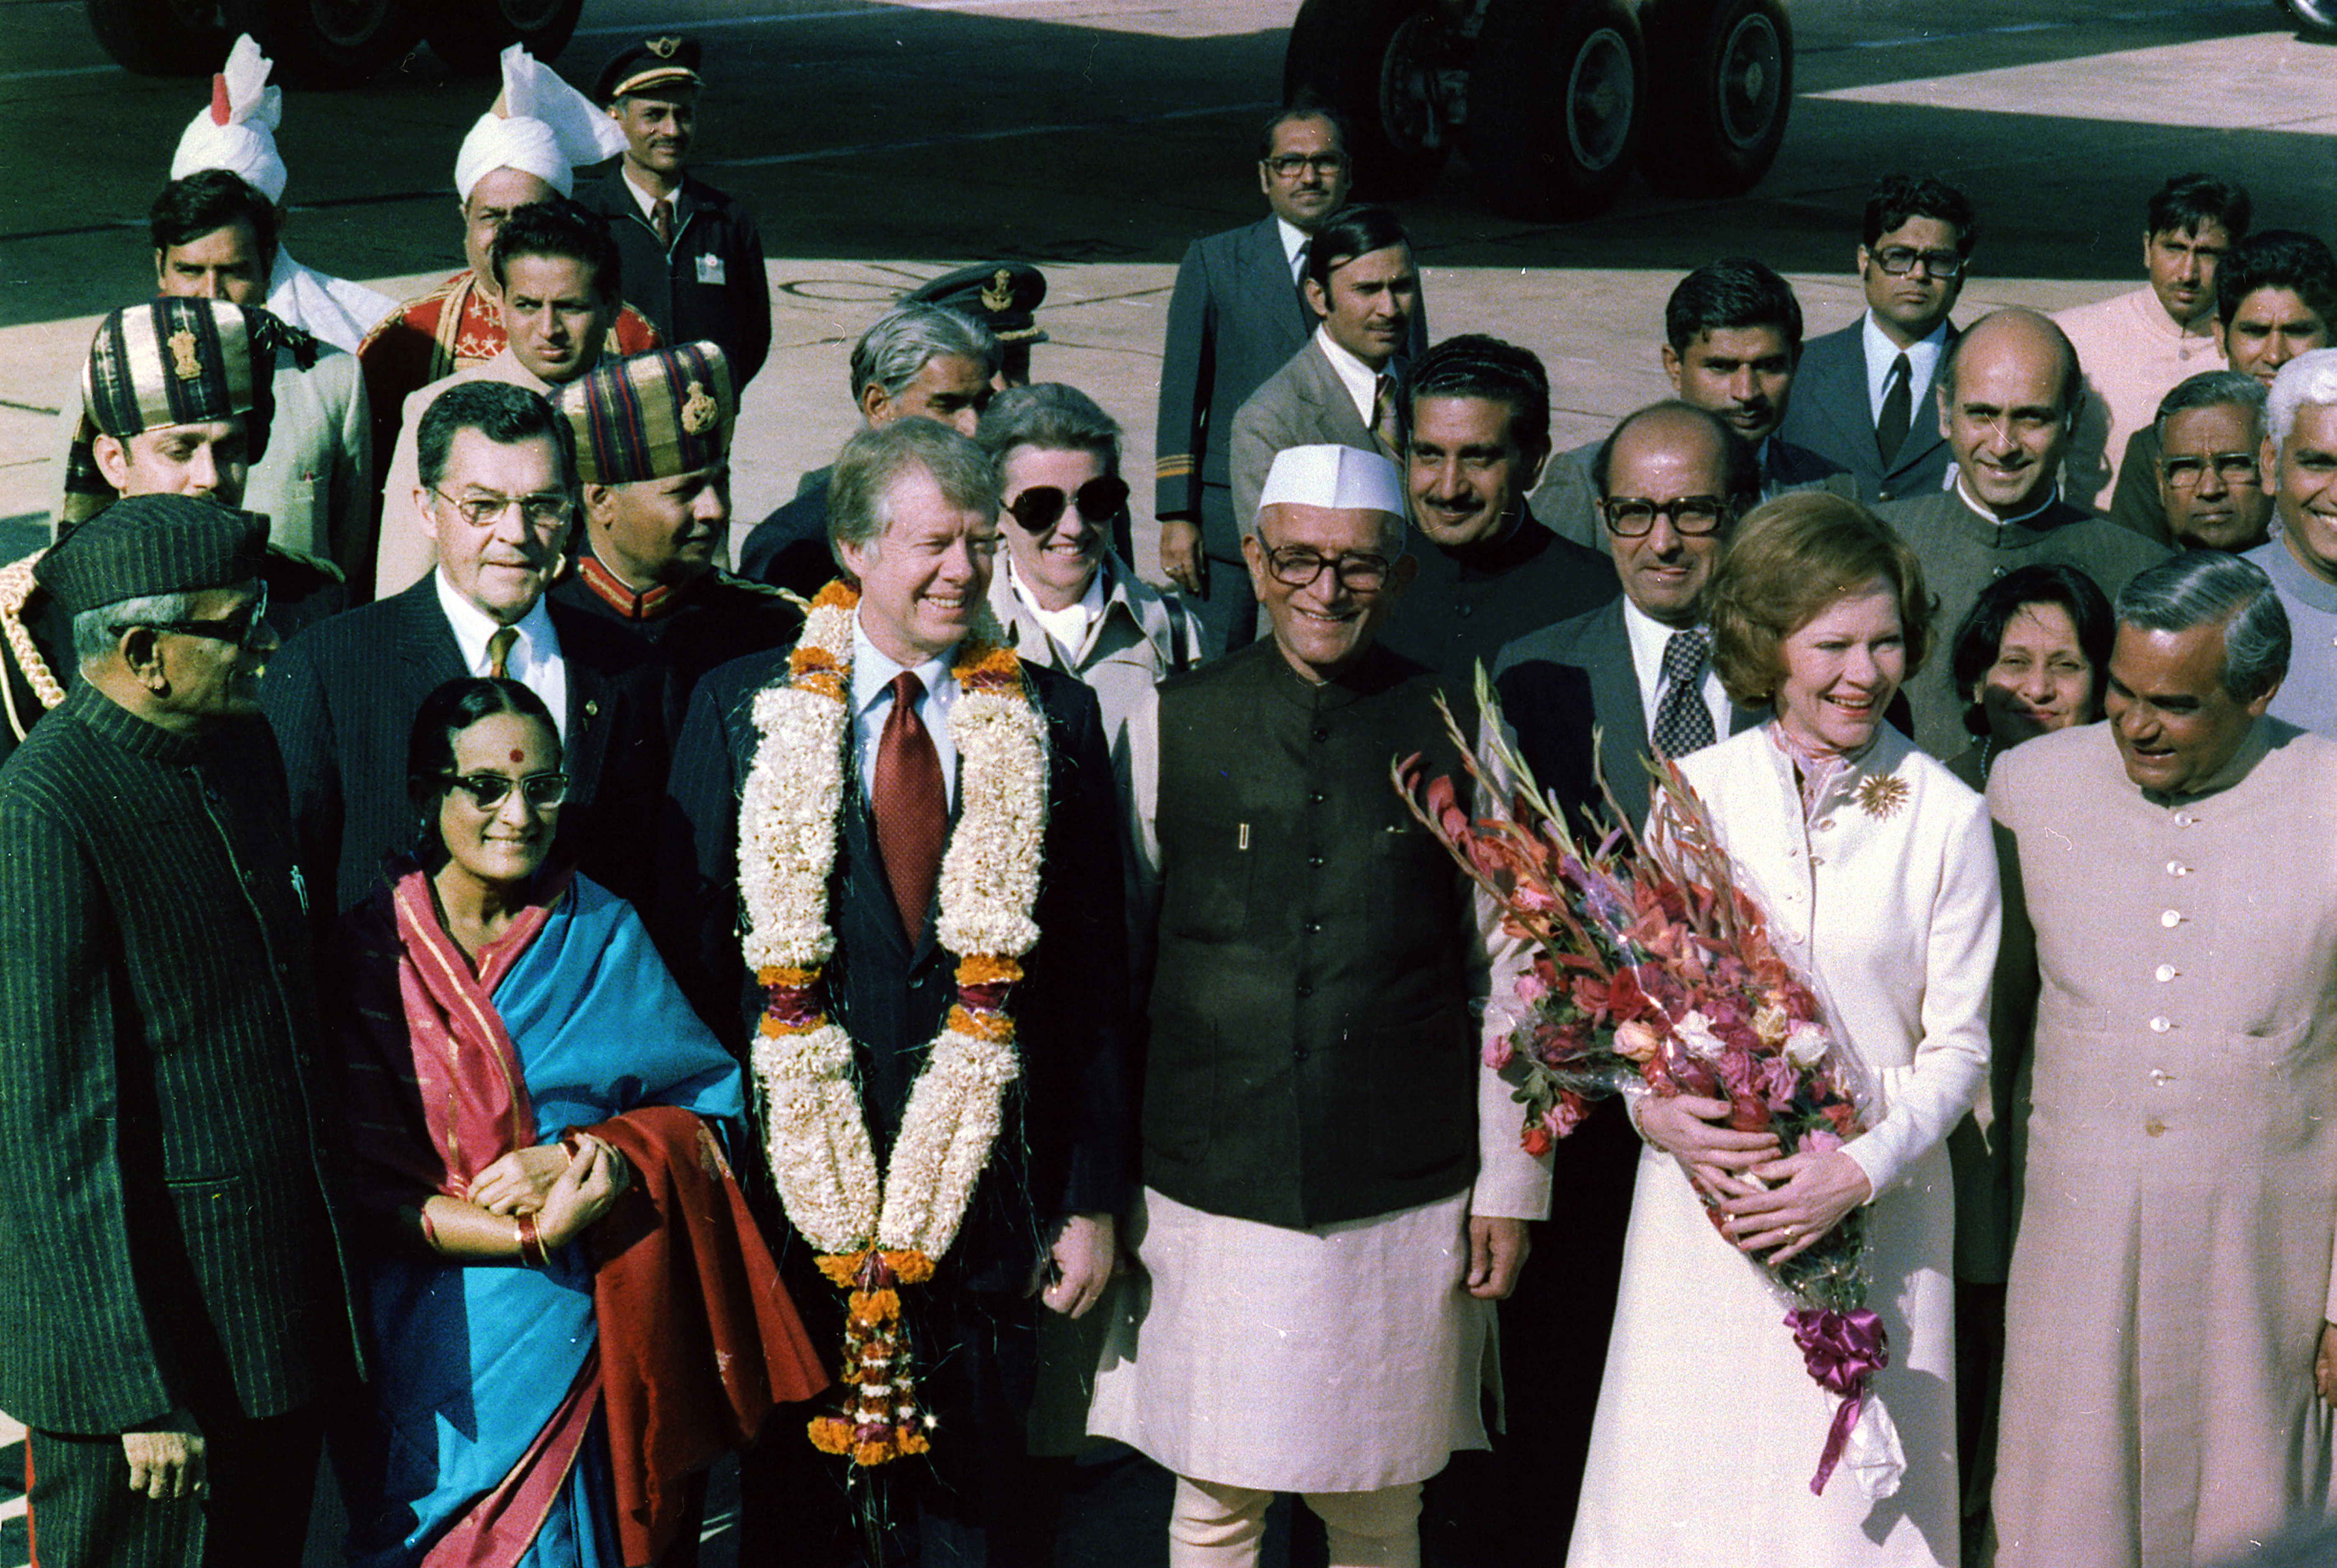 U.S. President Jimmy Carter is welcomed by Prime Minister Moraji Desai, standing with Rosalind Carter and future Indian Prime Minister Atal Bihari Vajpayee, during an arrival ceremony in New Delhi, India in January 1978.